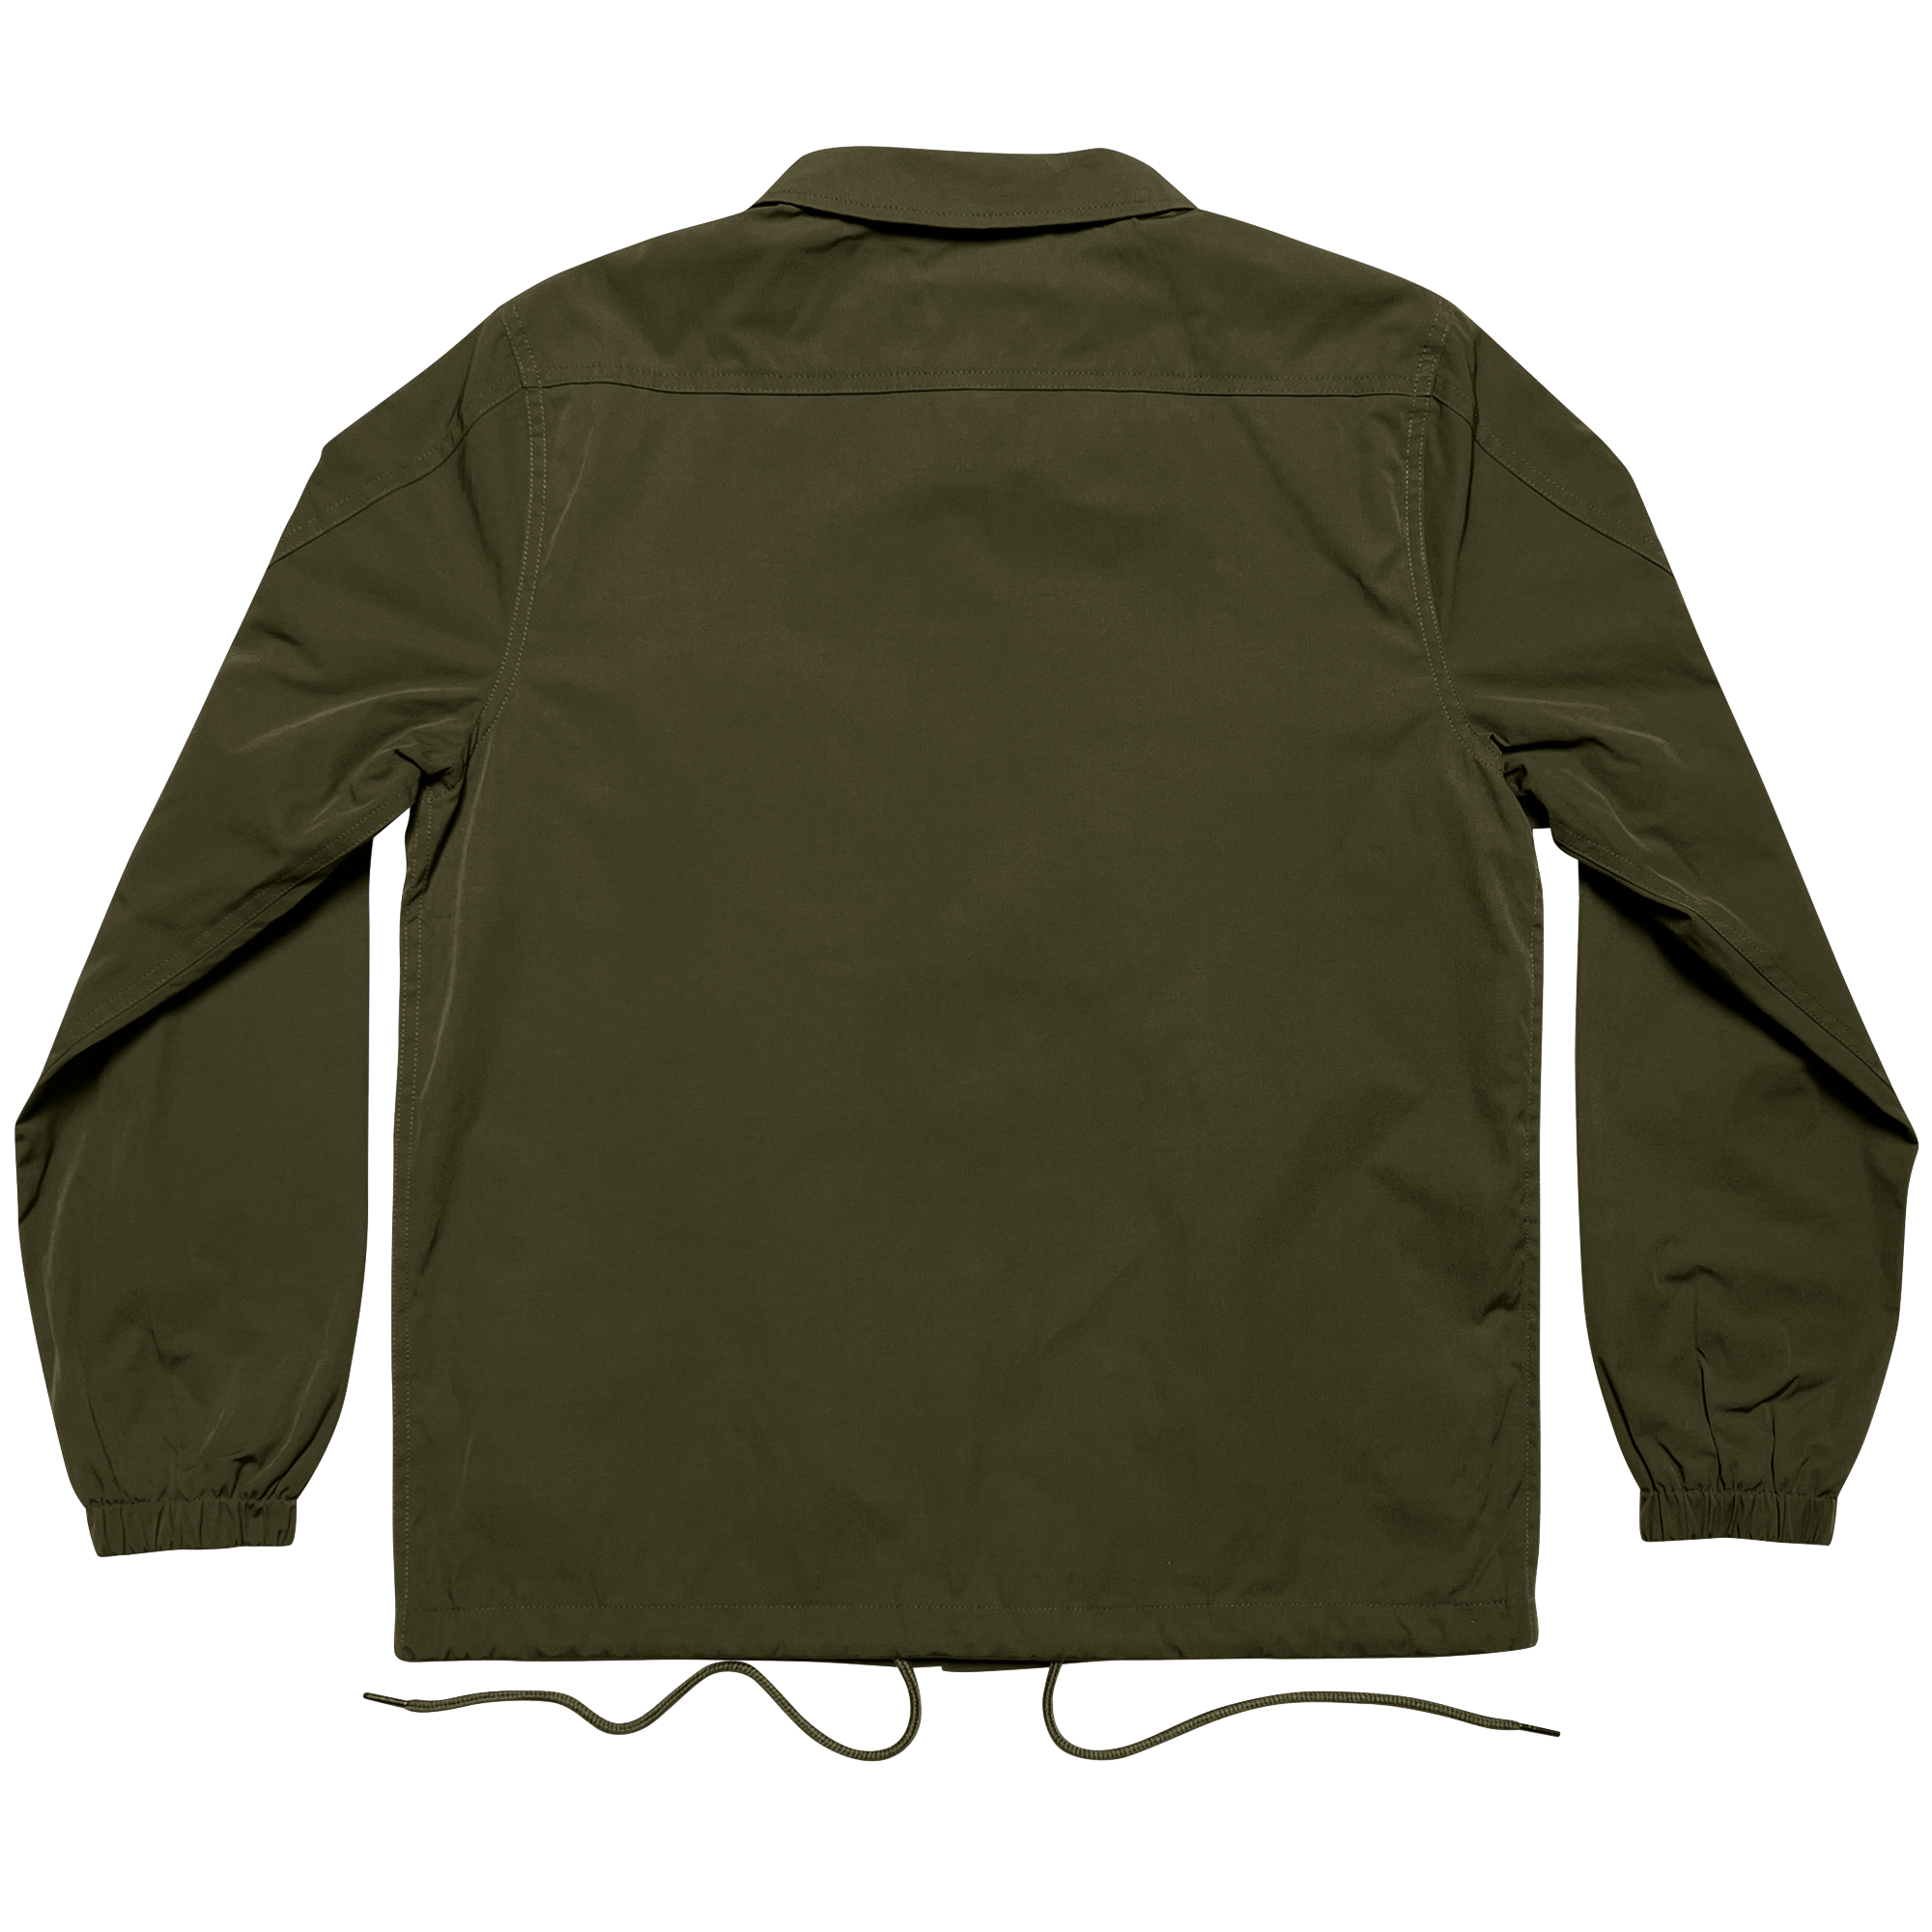 Back side of olive coaches jacket with waist drawstrings.